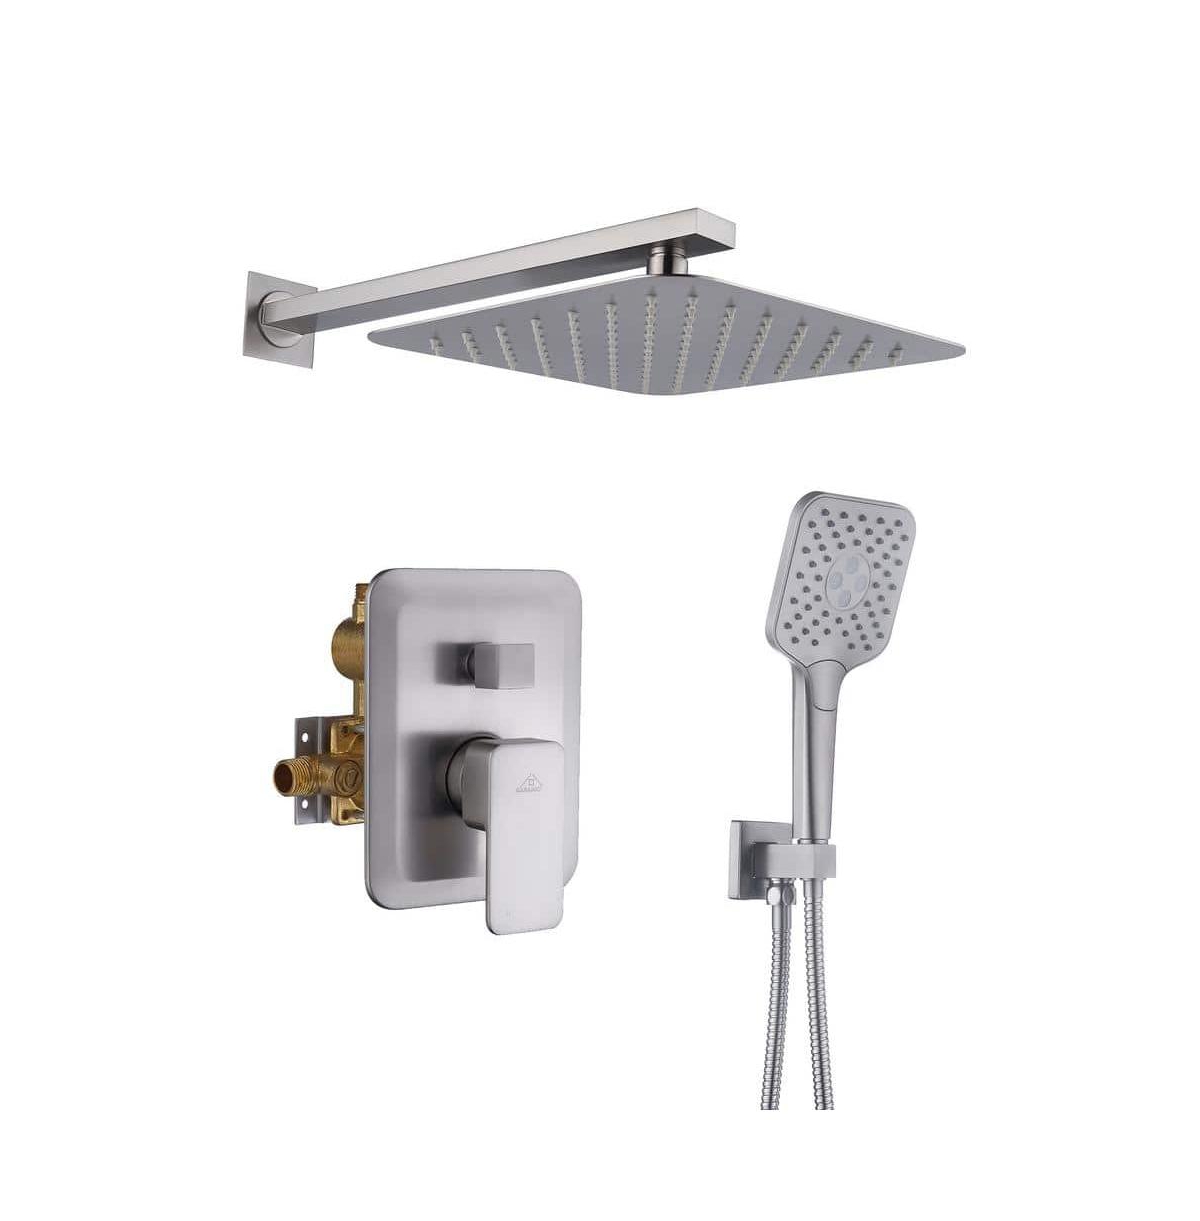 10" Inch Wall Mounted Square Shower System Set with Handheld Spray - Brushed nickel